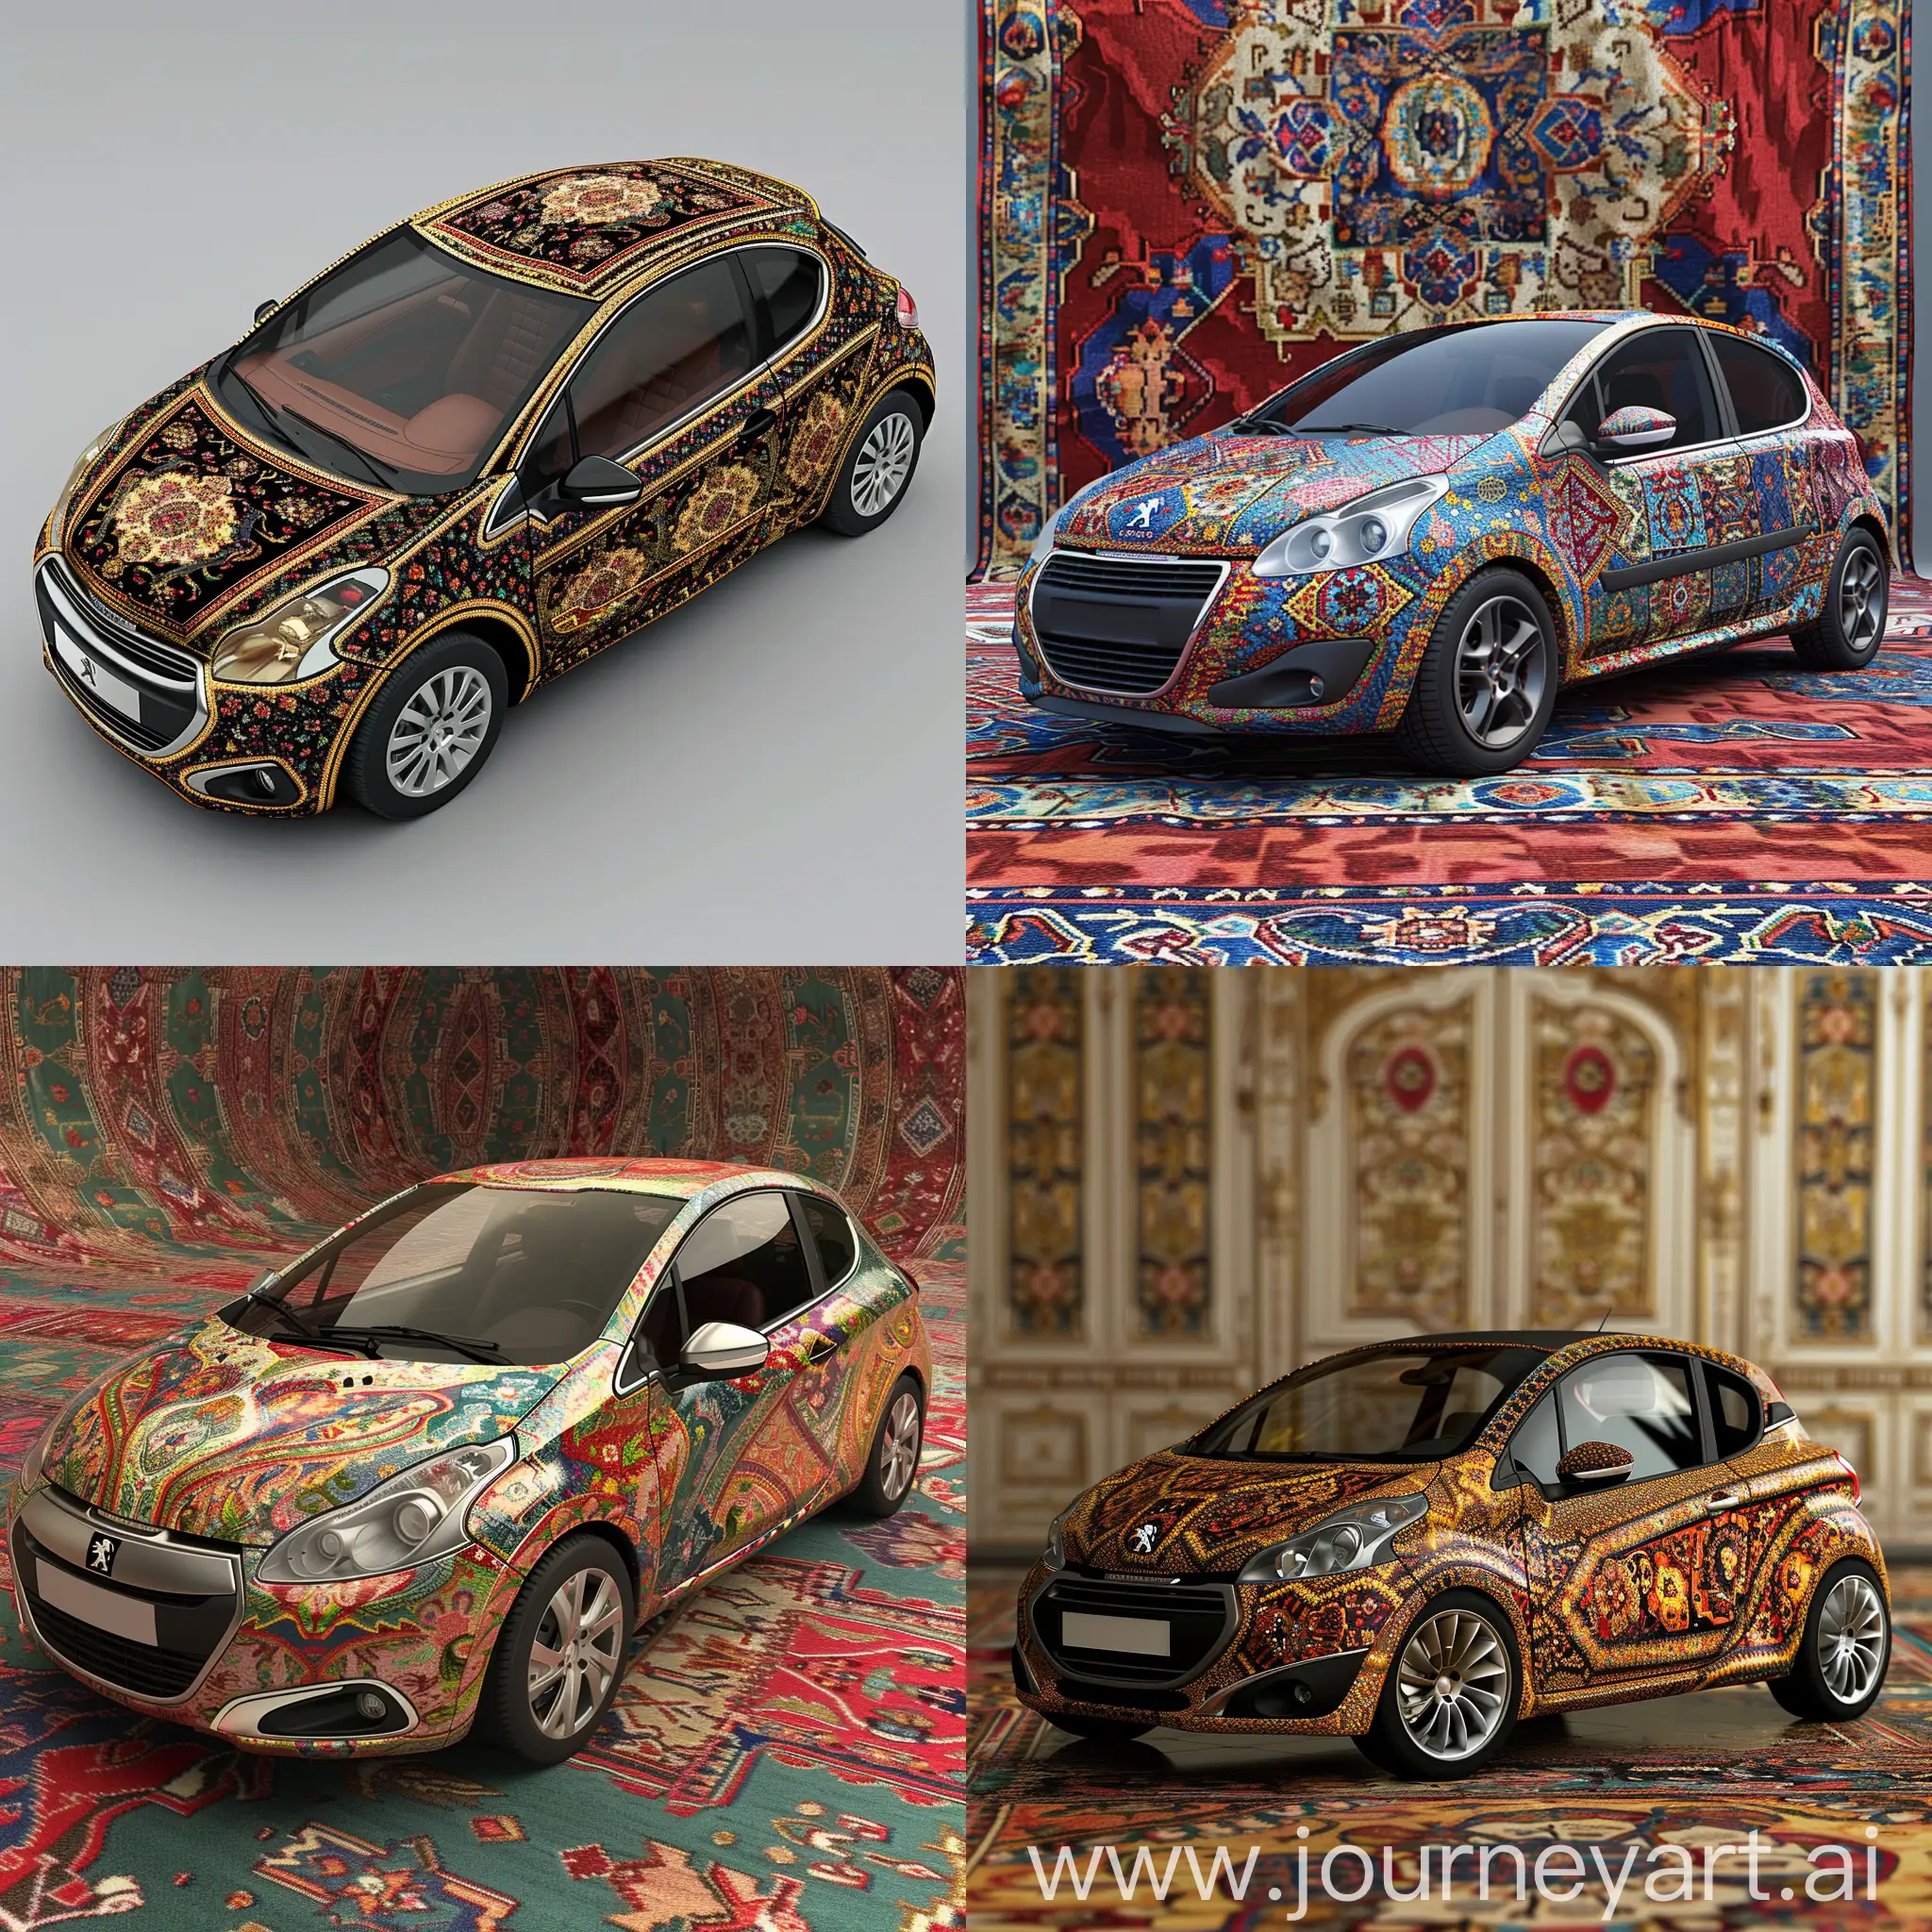 Design the Peugeot 207 car with Iranian carpet designs in a completely natural way, the background should be Iranian carpet, very realistic, 3d, exhibition angle, there should be a design of Iranian carpet on the car and match the background